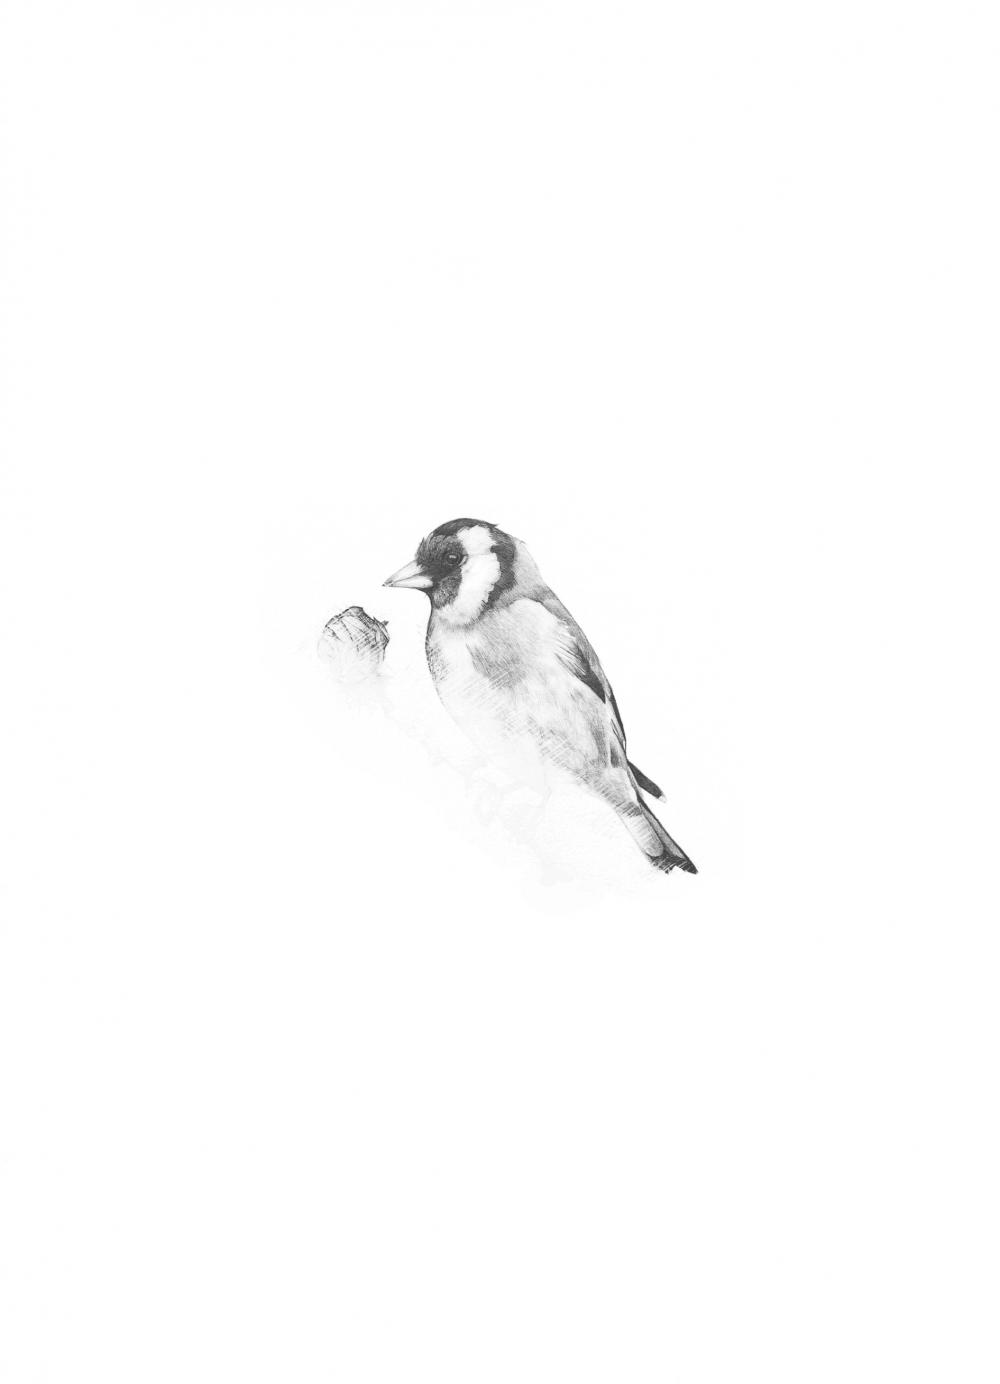 A goldfinch drawn in pencil with the lower part of the drawing erased representing the artists vision